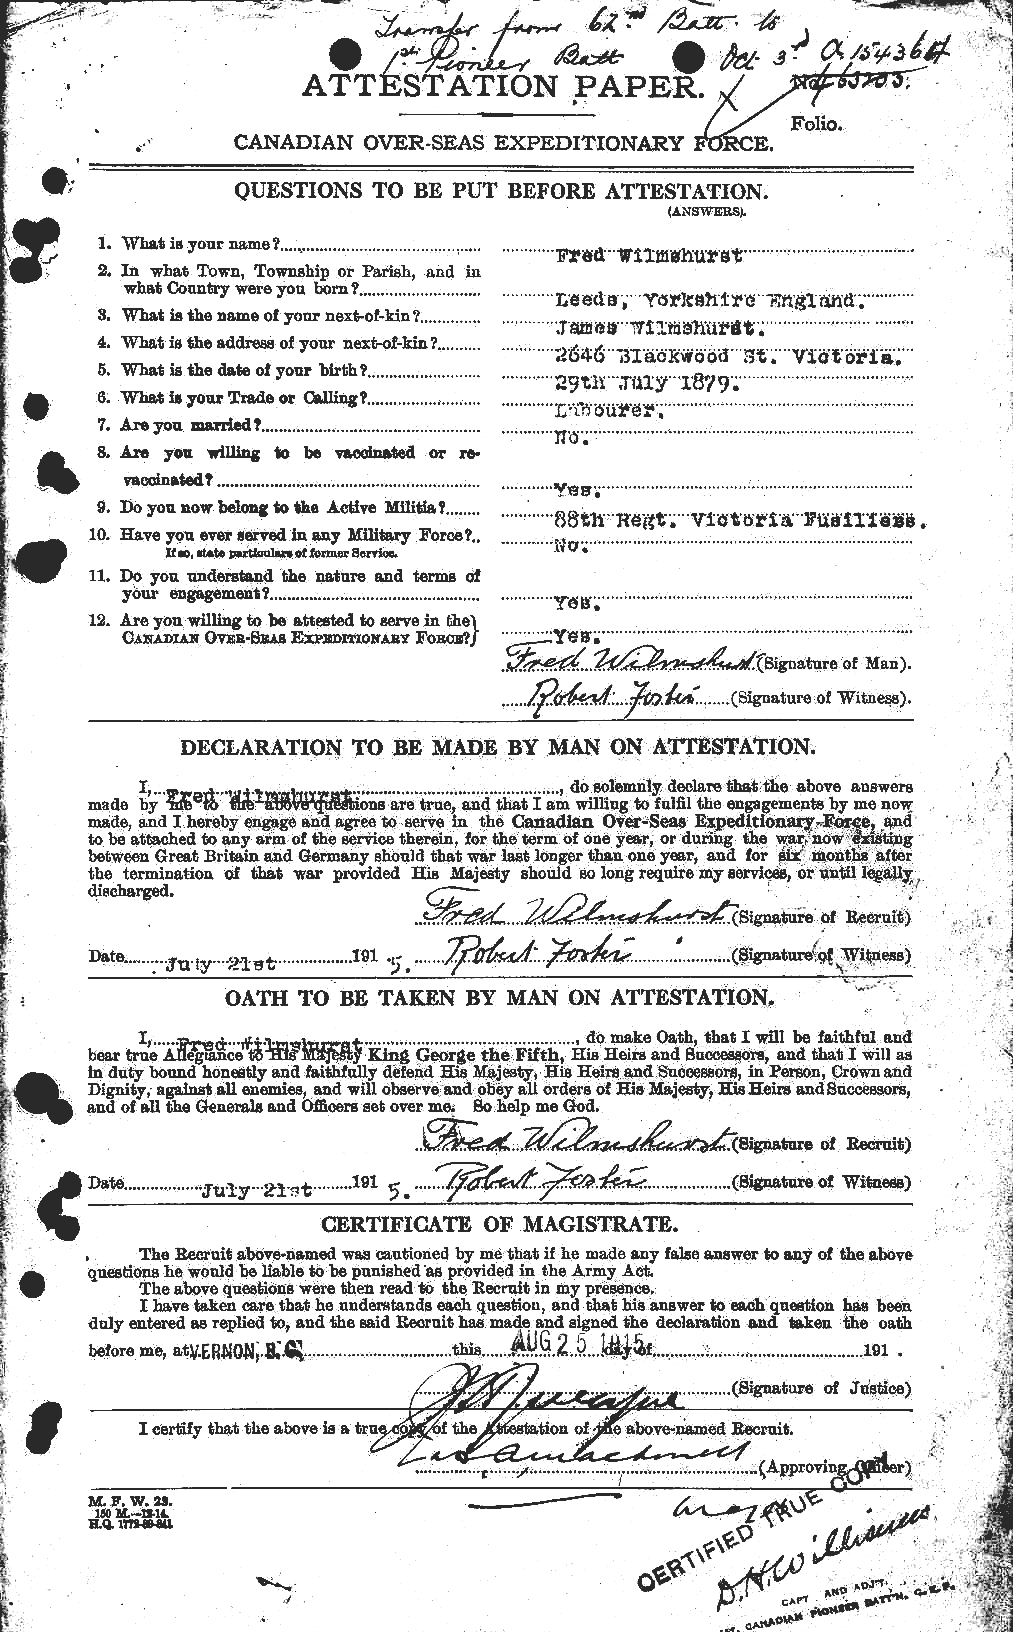 Personnel Records of the First World War - CEF 677091a